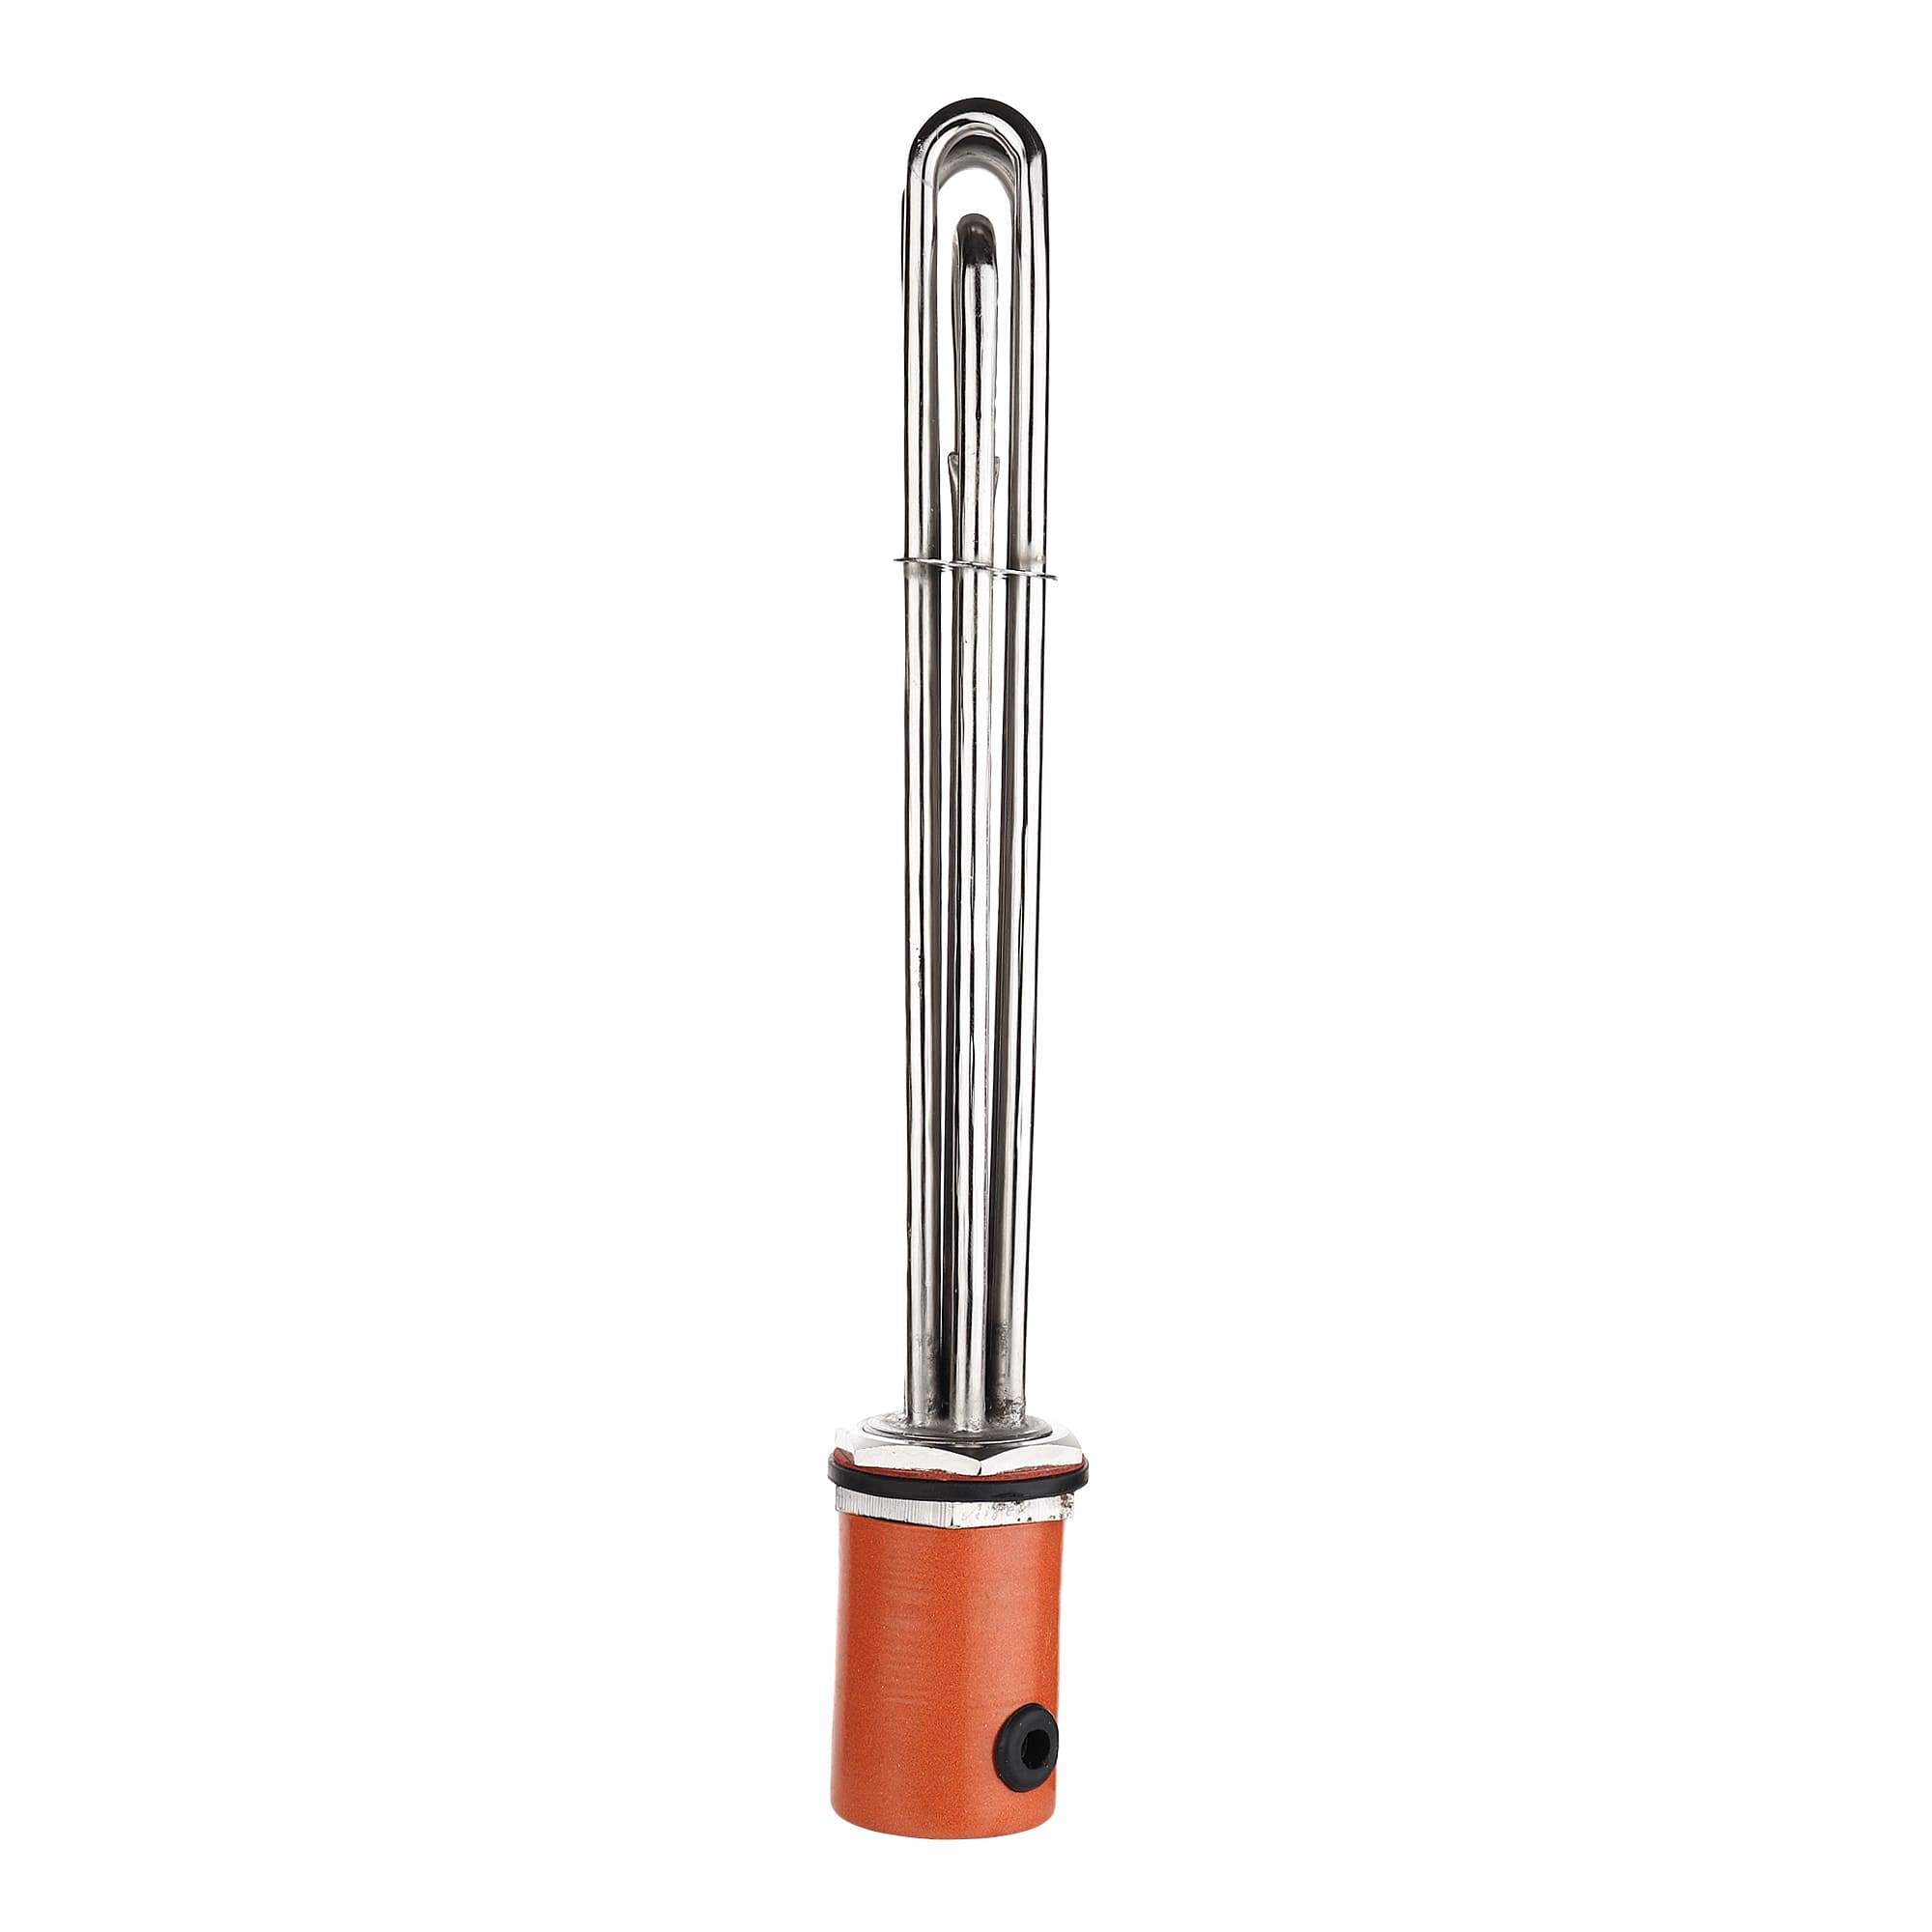 Triple Pipe Immersion Heater